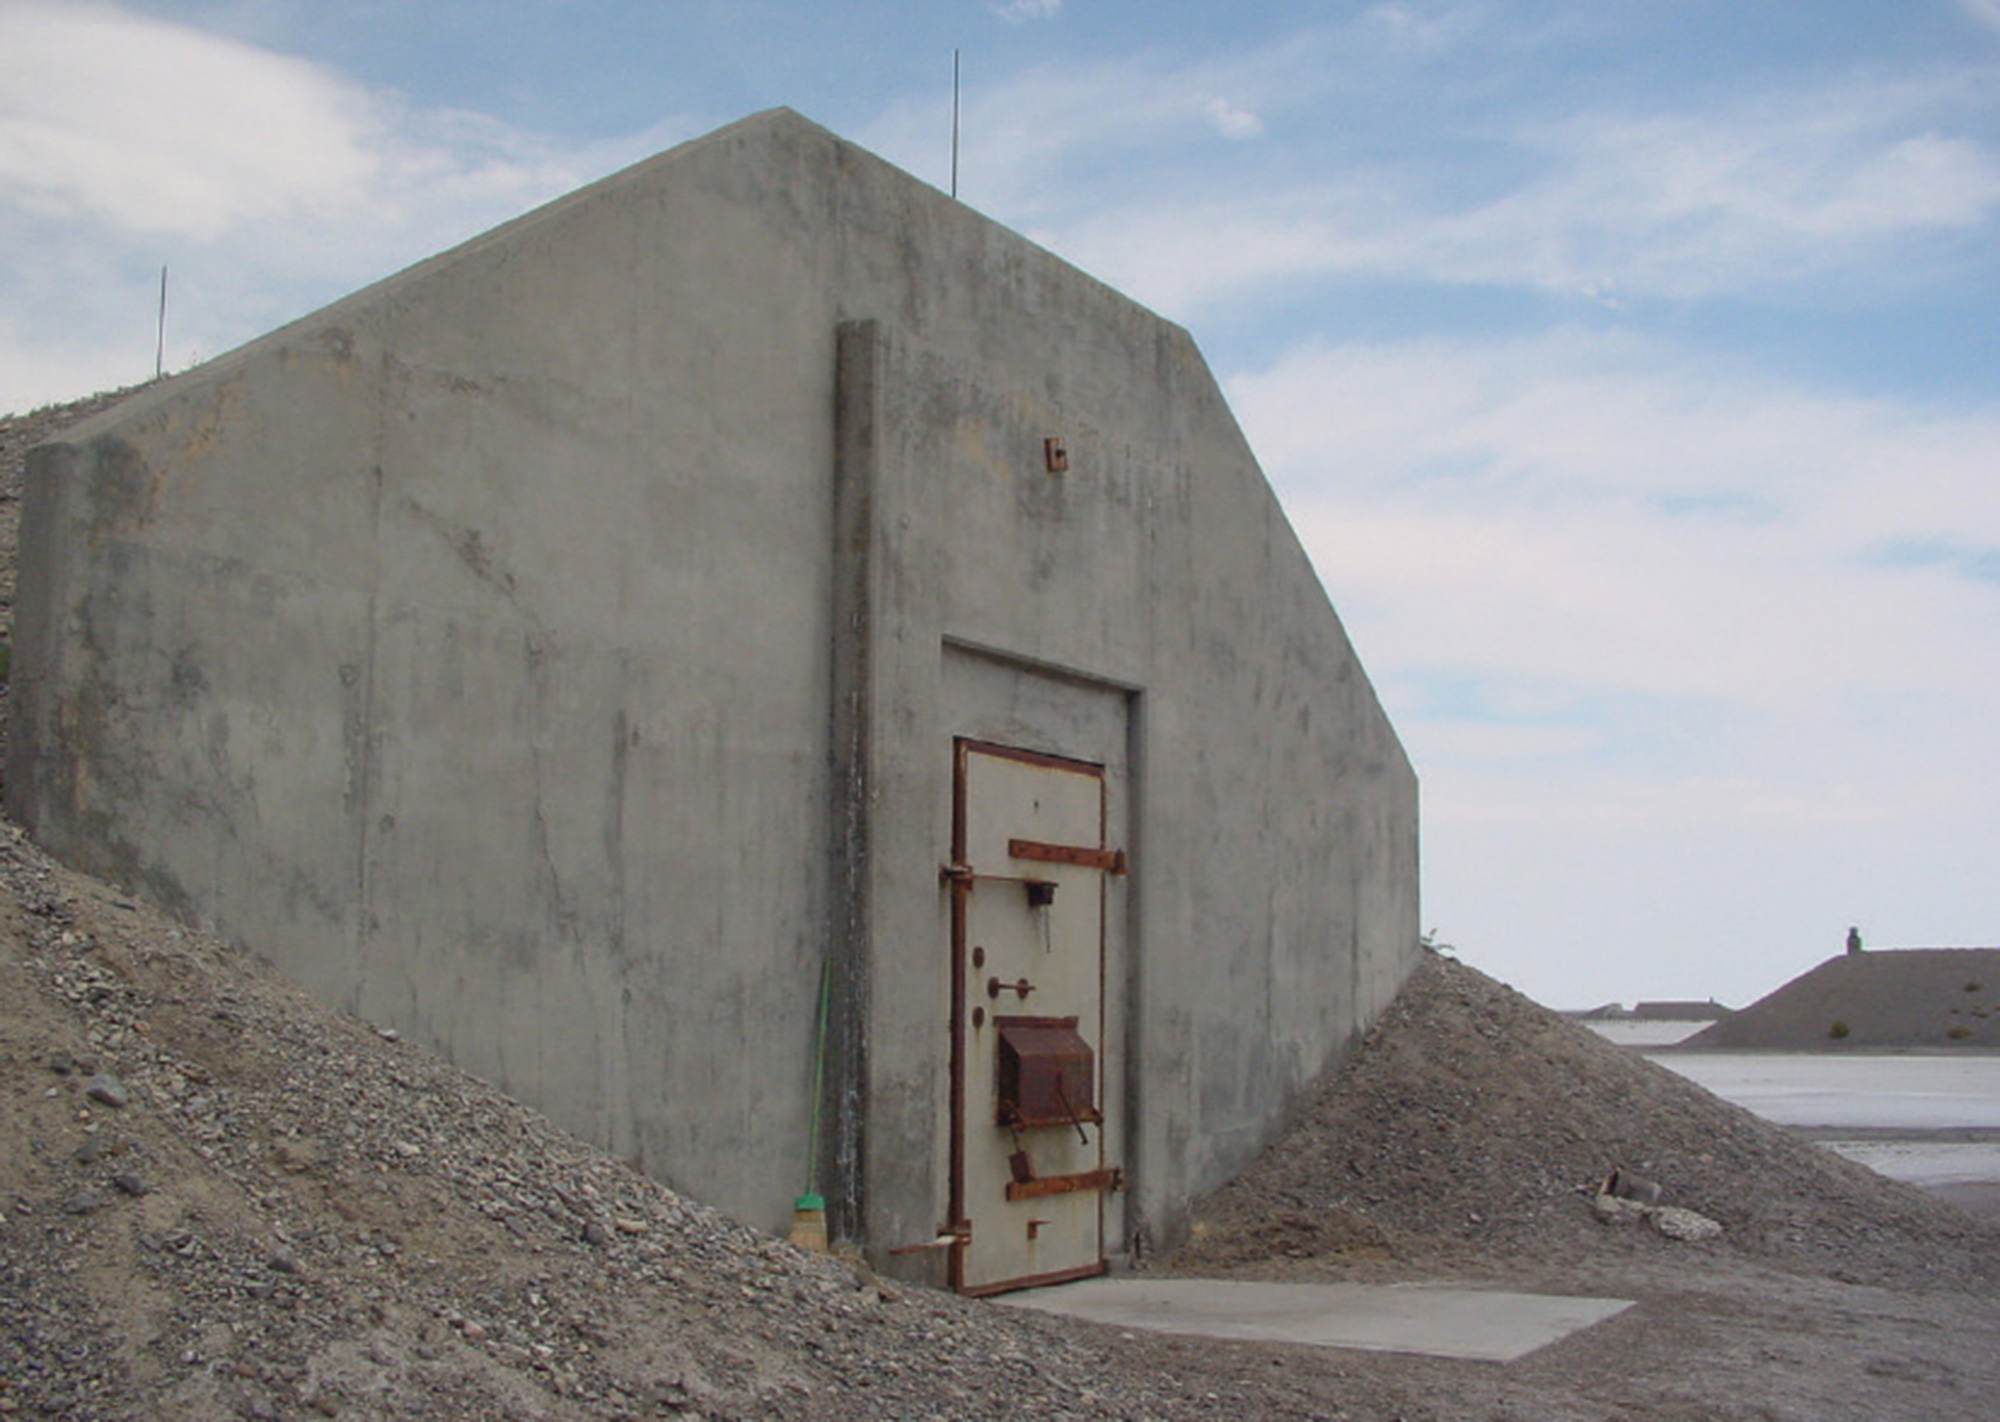 A photograph of a cement storage igloo with a rusting, barred door.